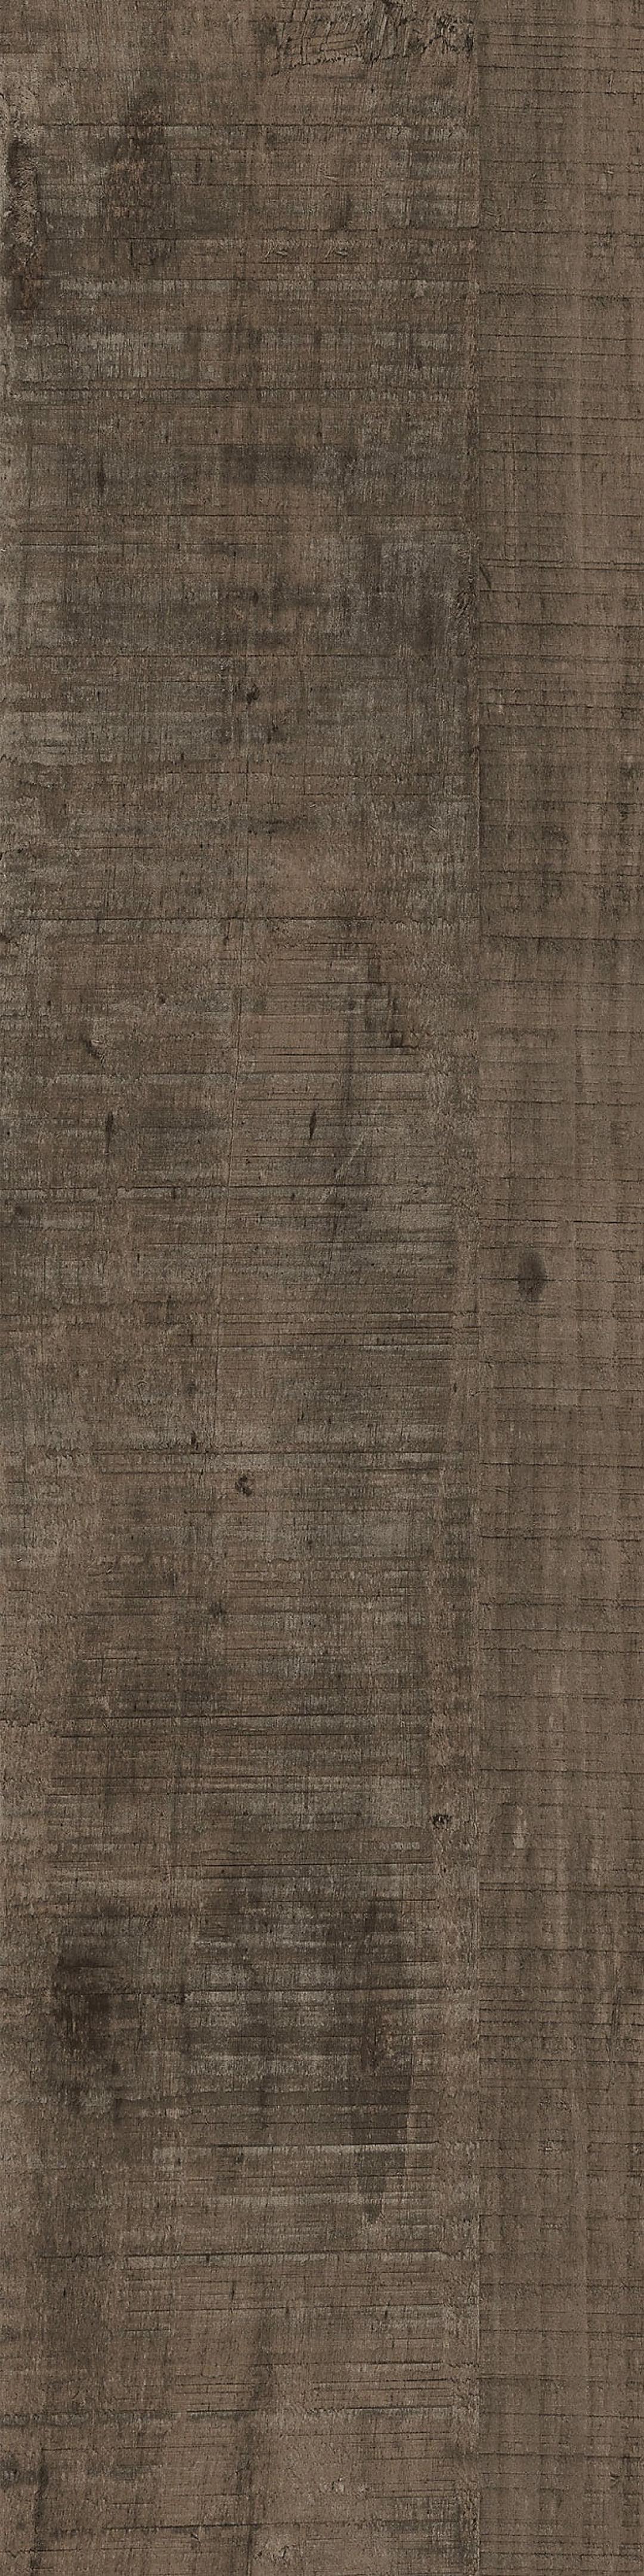 Level Set - Textured Woodgrains - Distressed walnut from Inzide